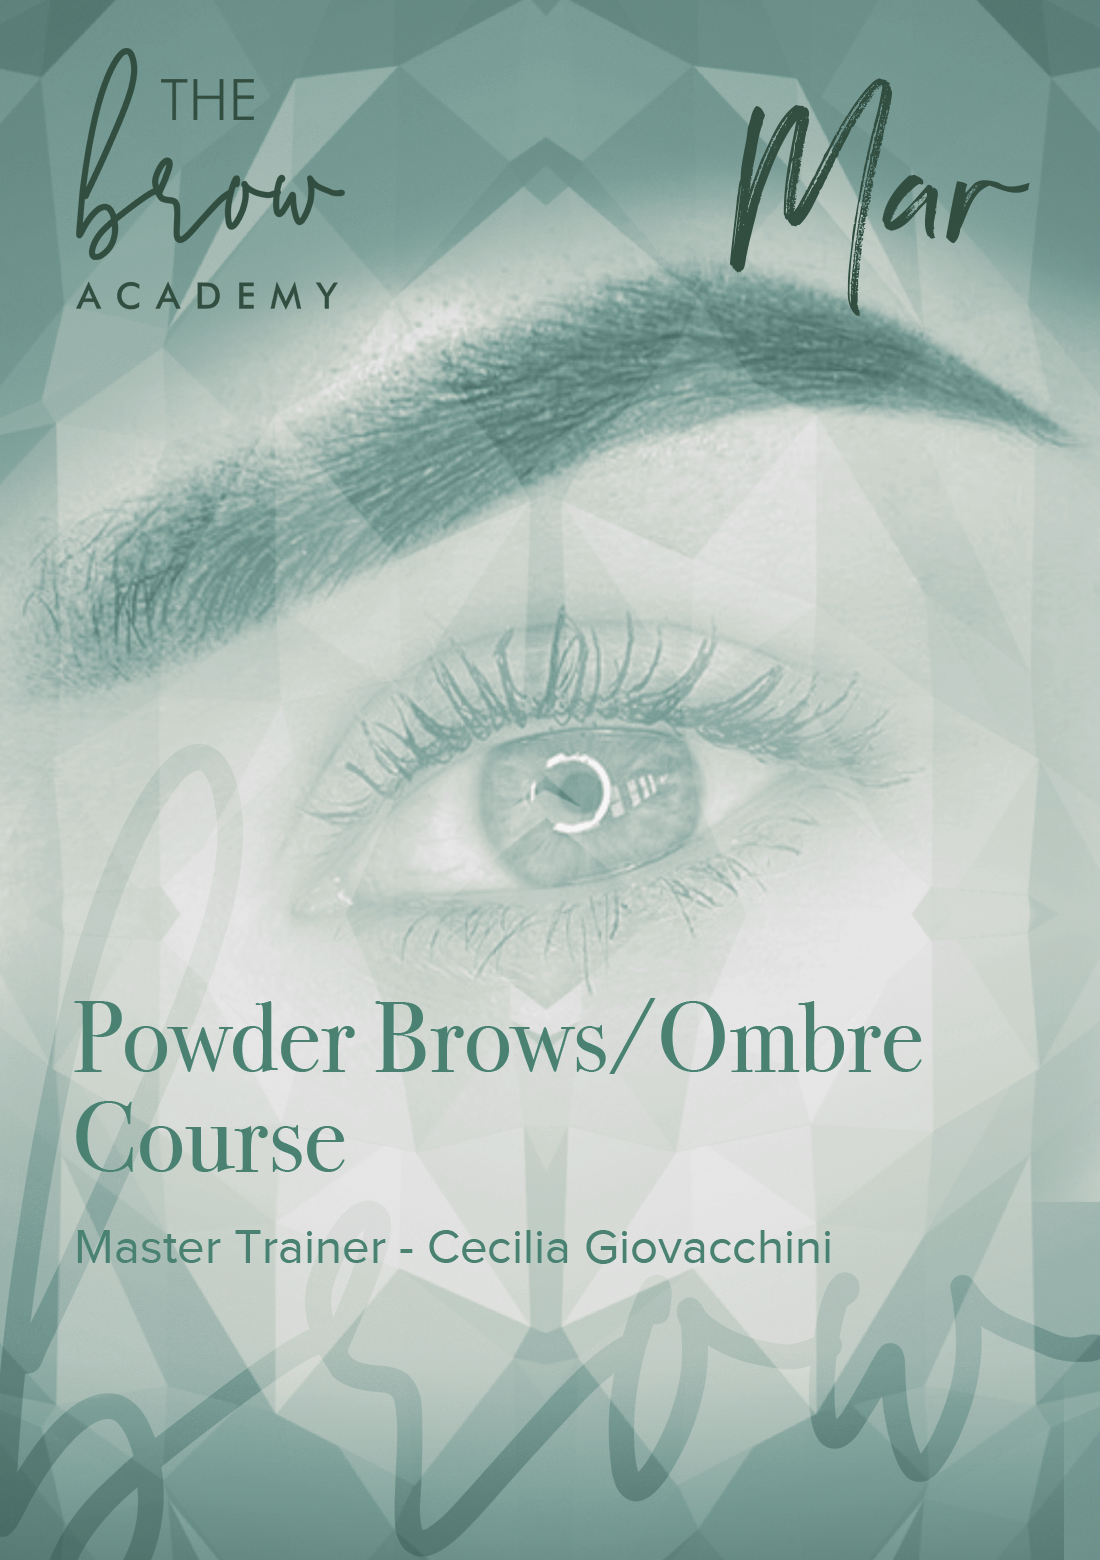 East Bay Powder Brows Ombre Courses - March